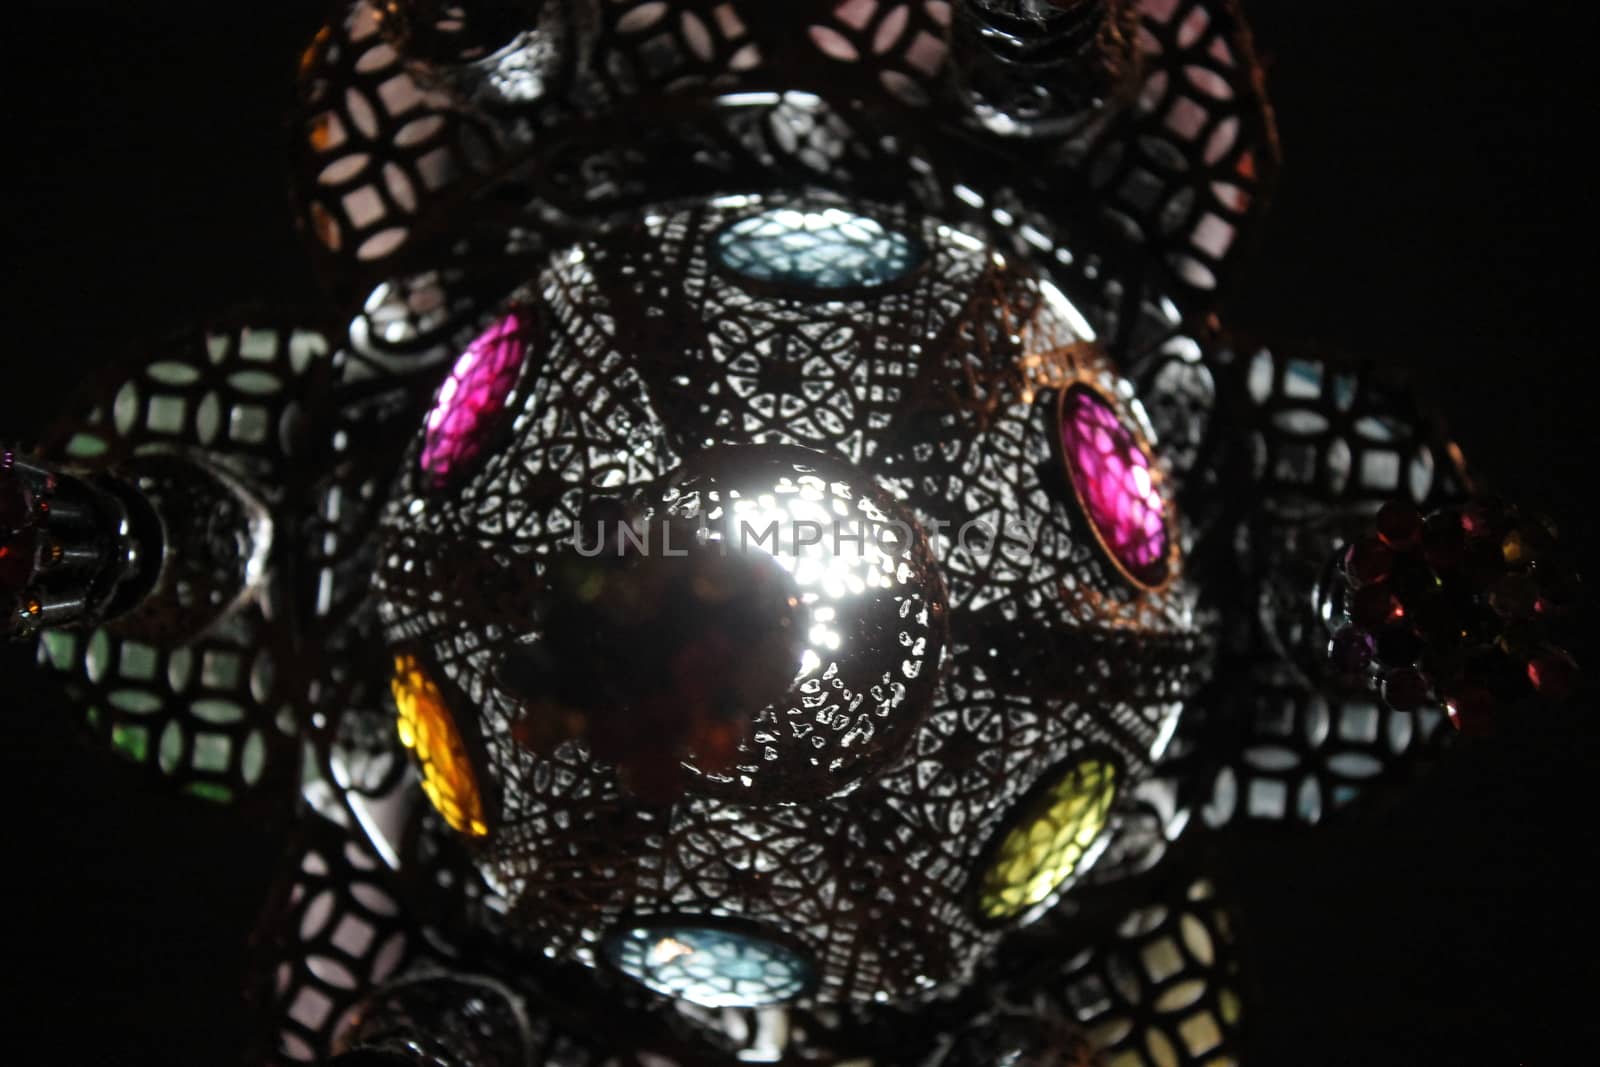 Typical Indian lamp with colored glasses